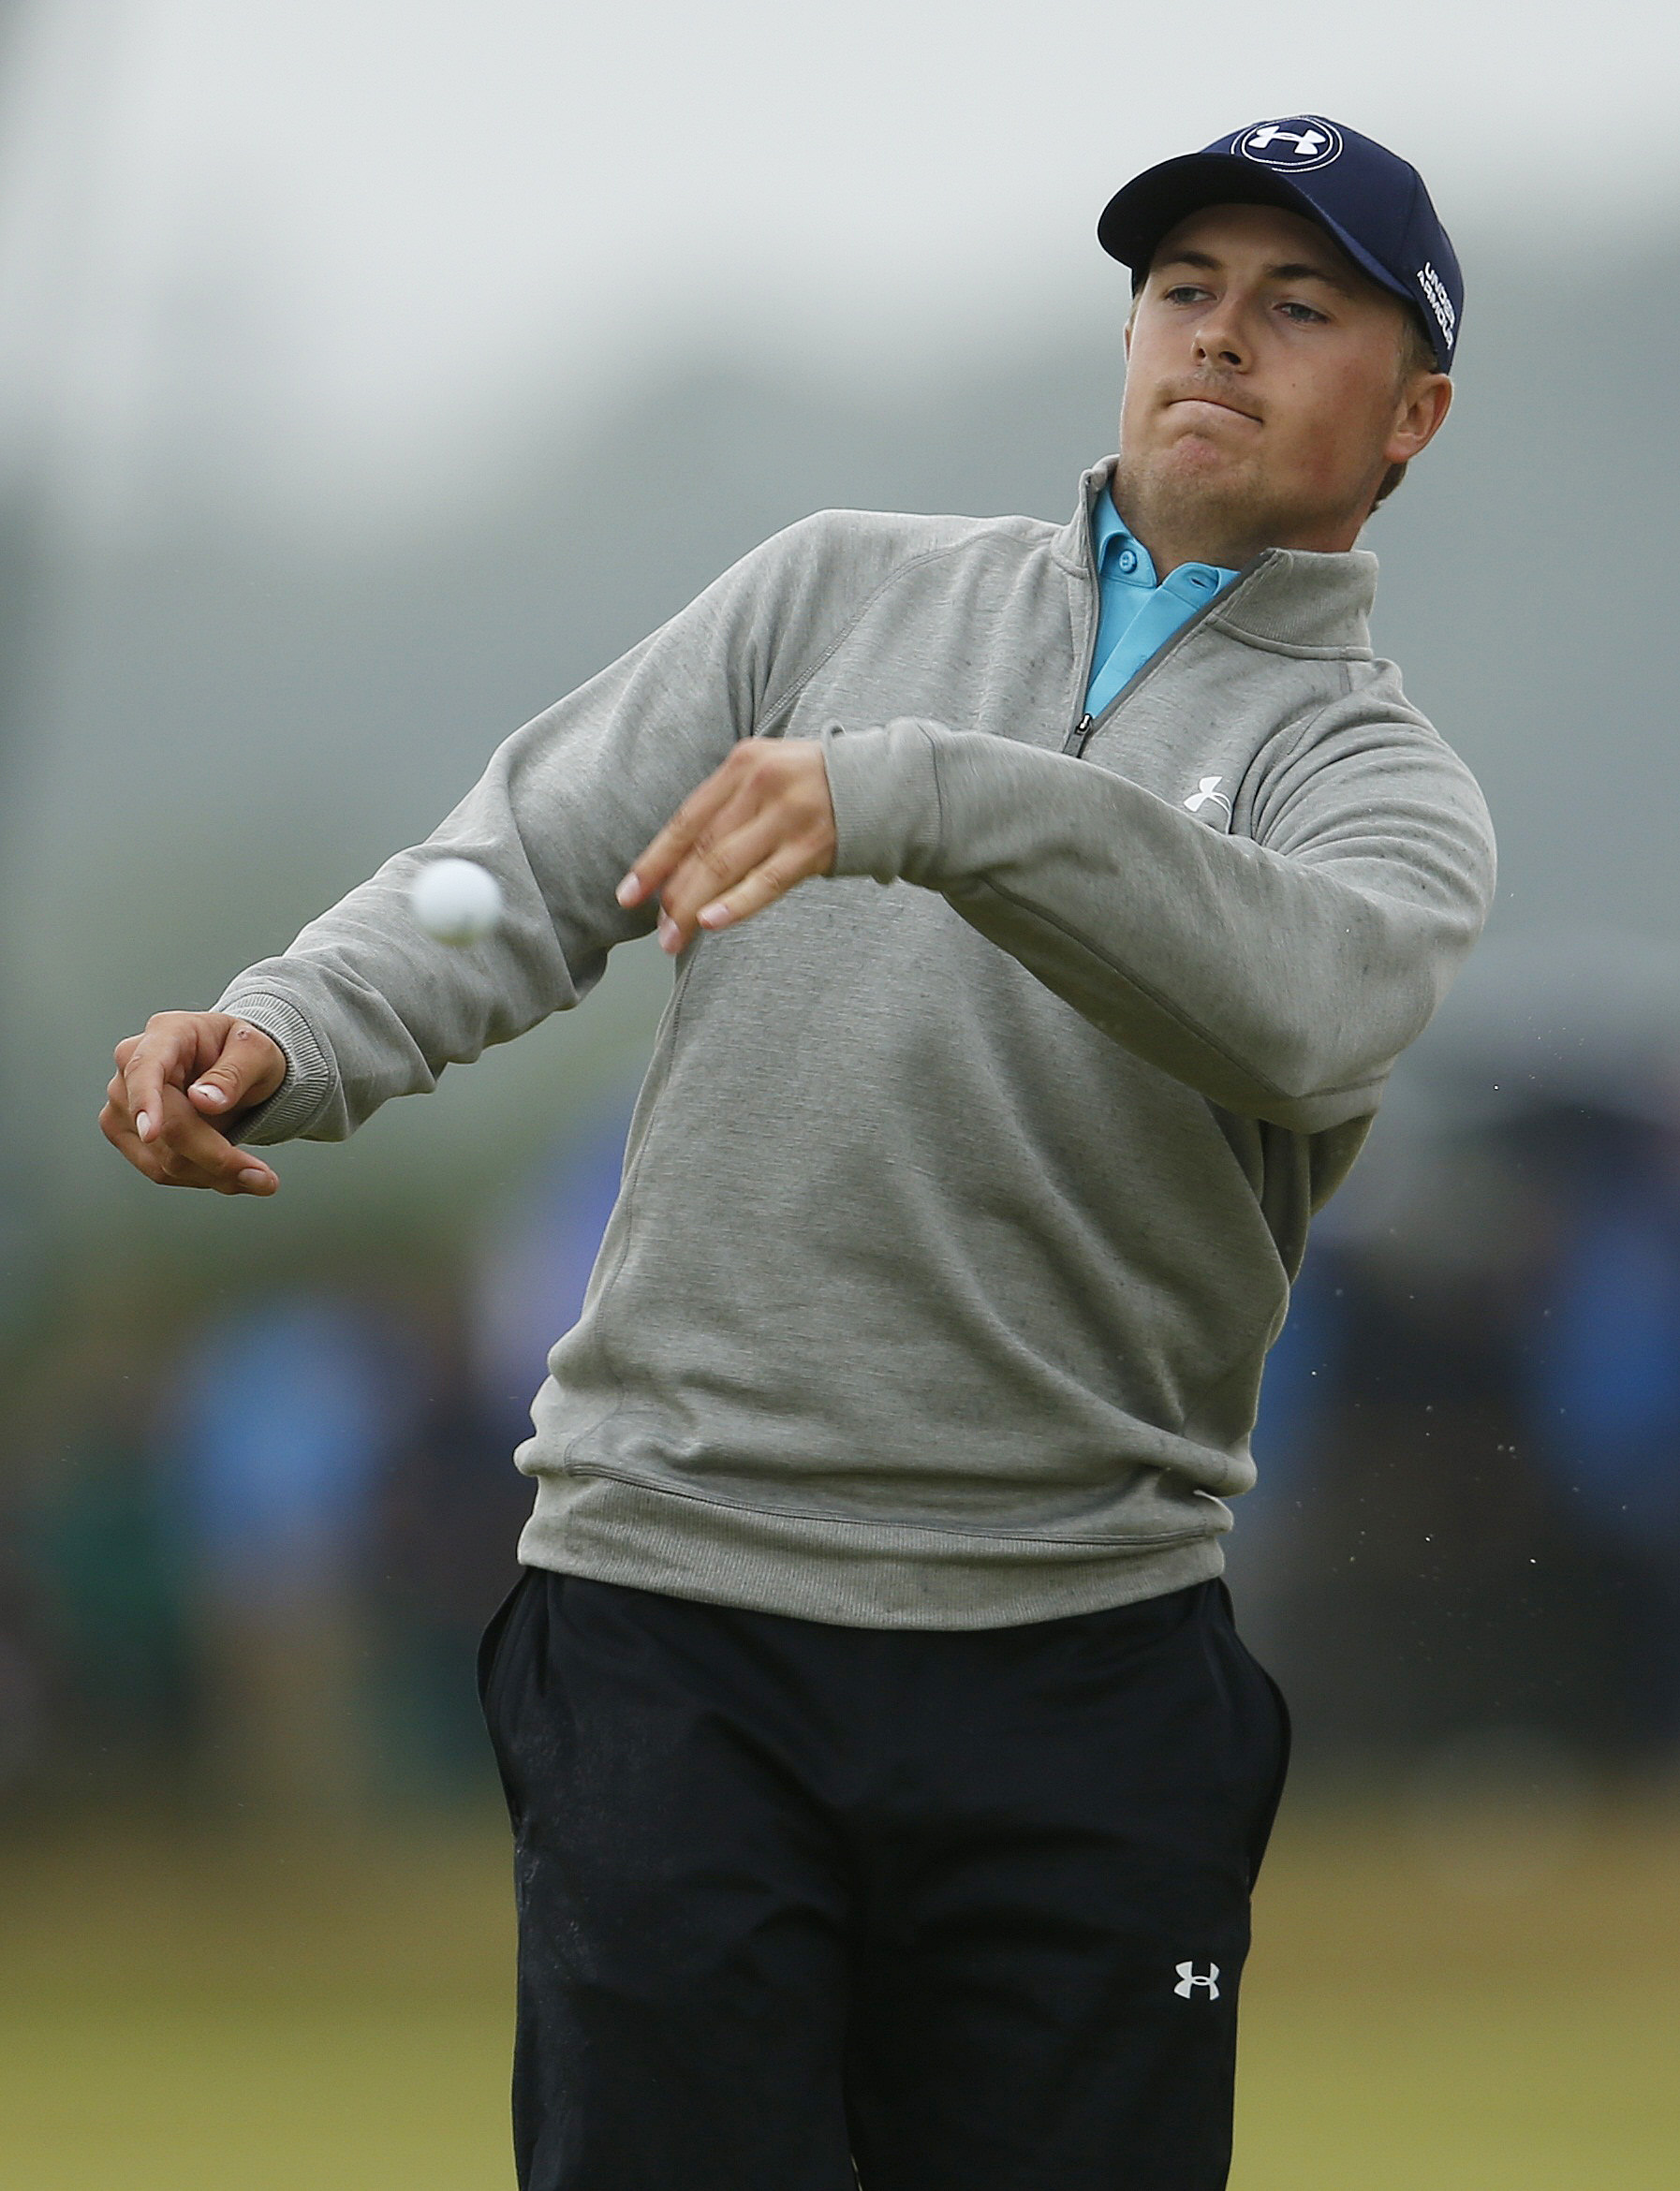 Jordan Spieth throws his ball into the crowd after his double bogey on the eighth hole. (REUTERS)